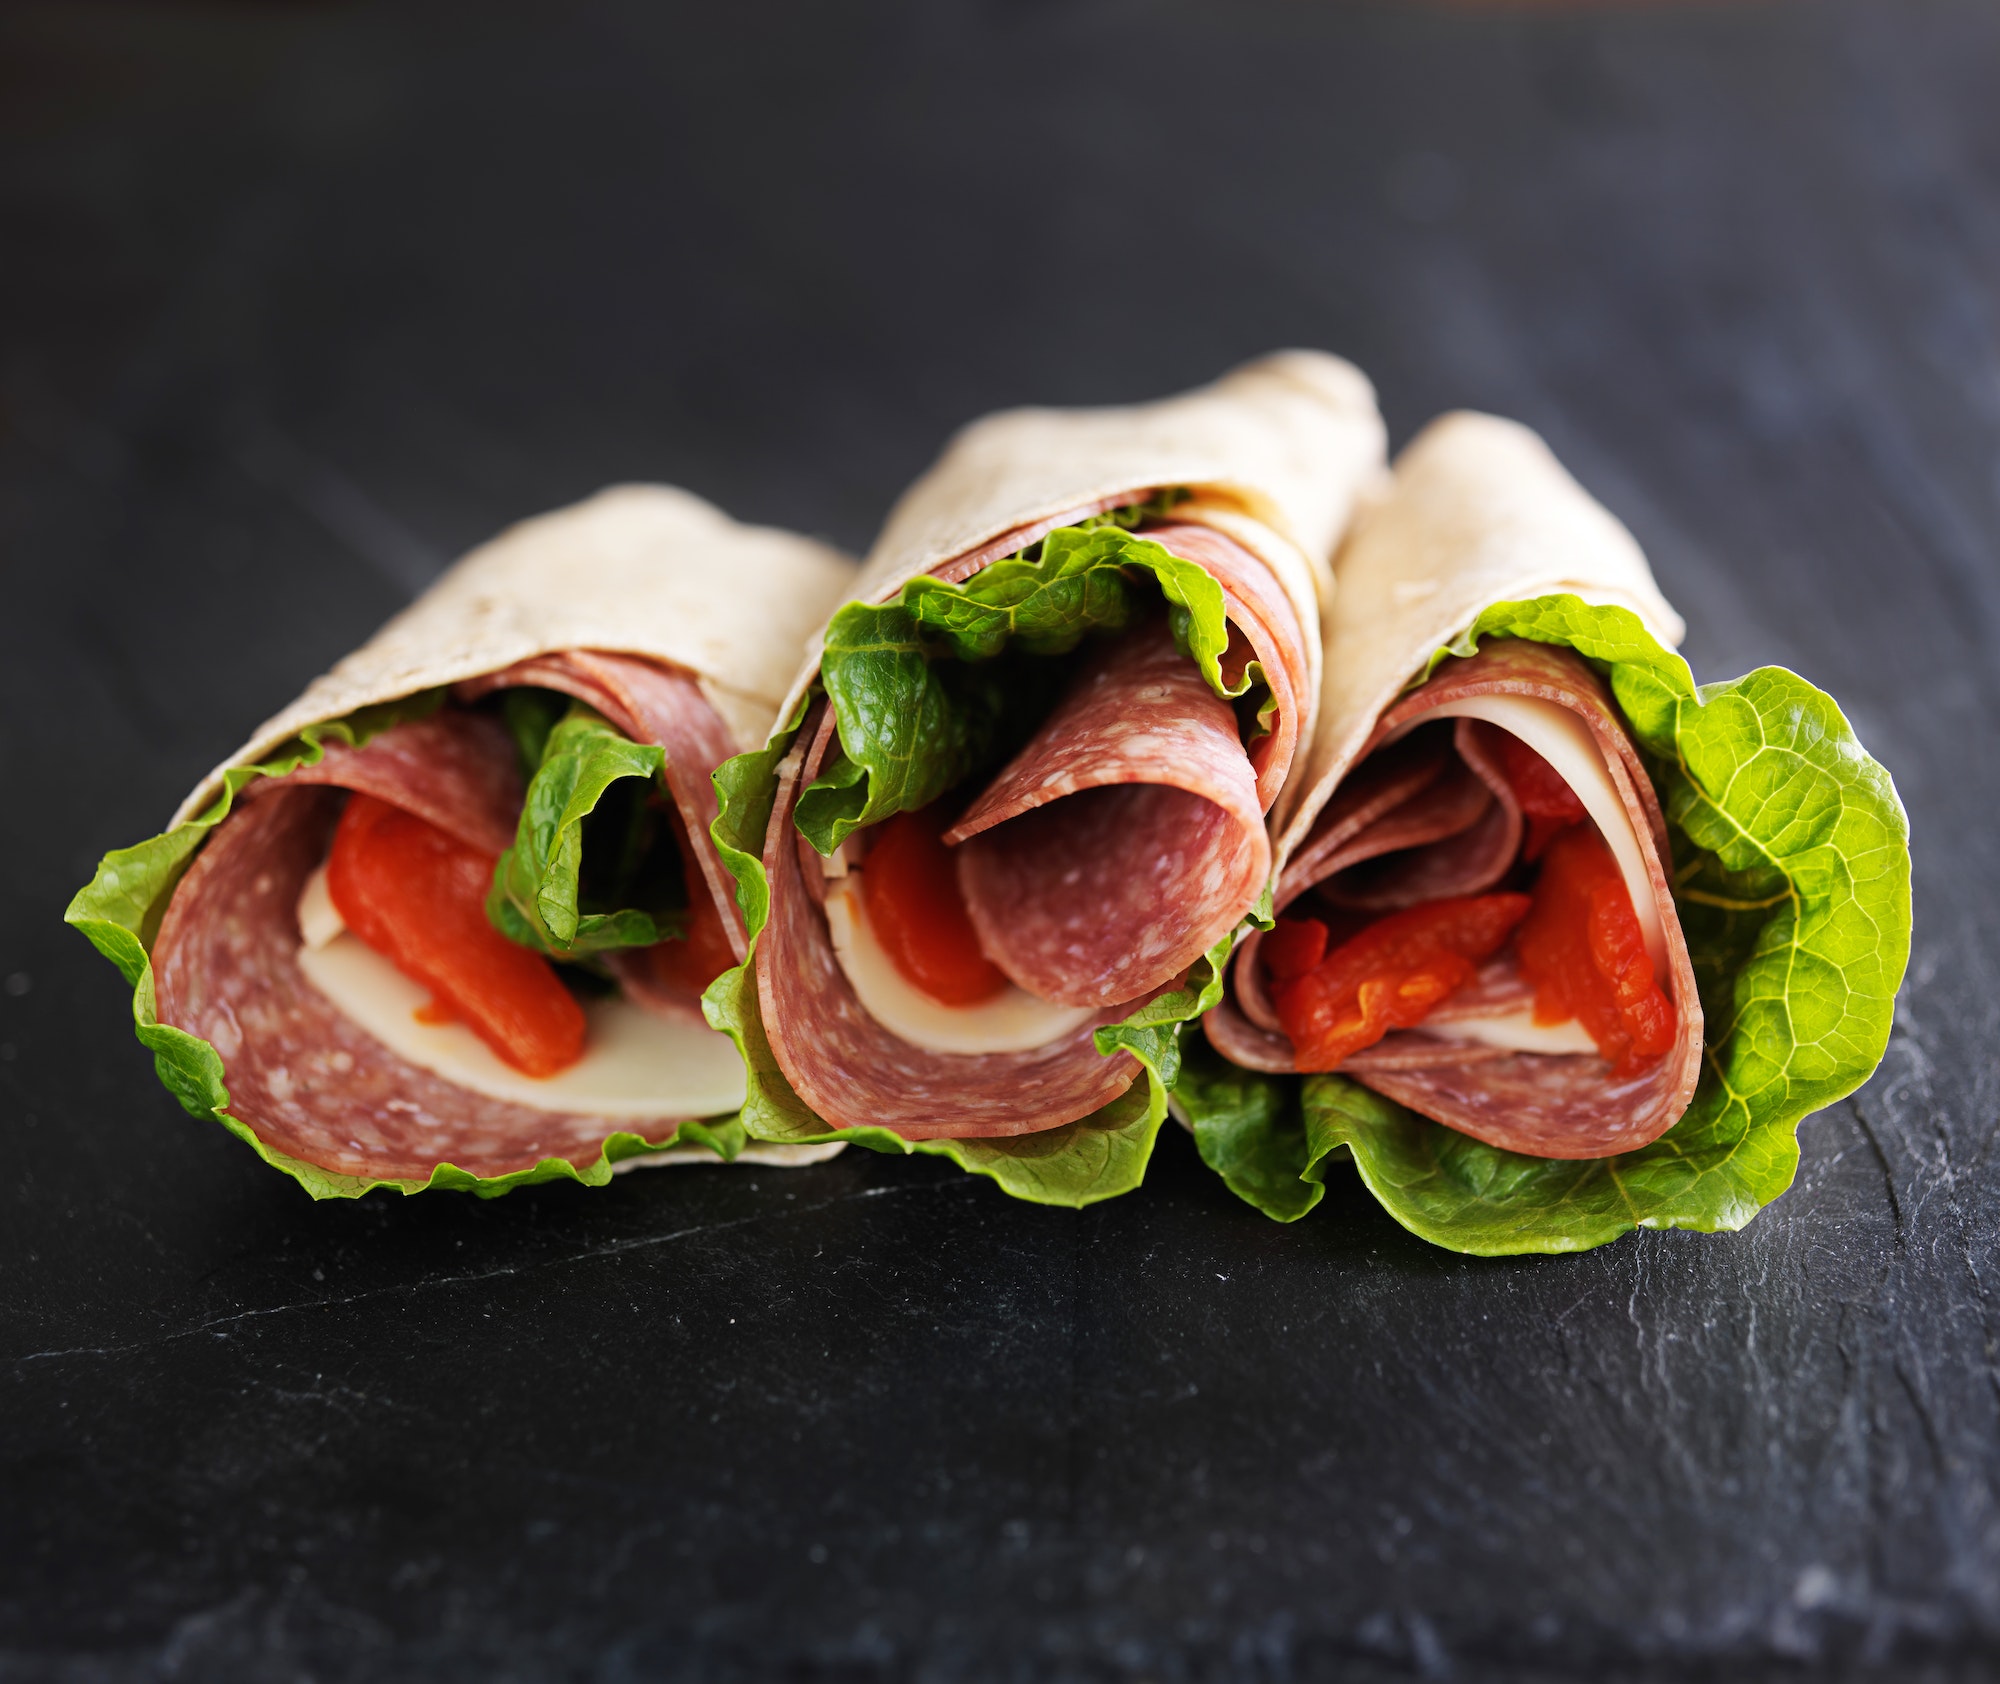 italian wraps with hard salami, lettuce, provolone cheese and roasted pepper